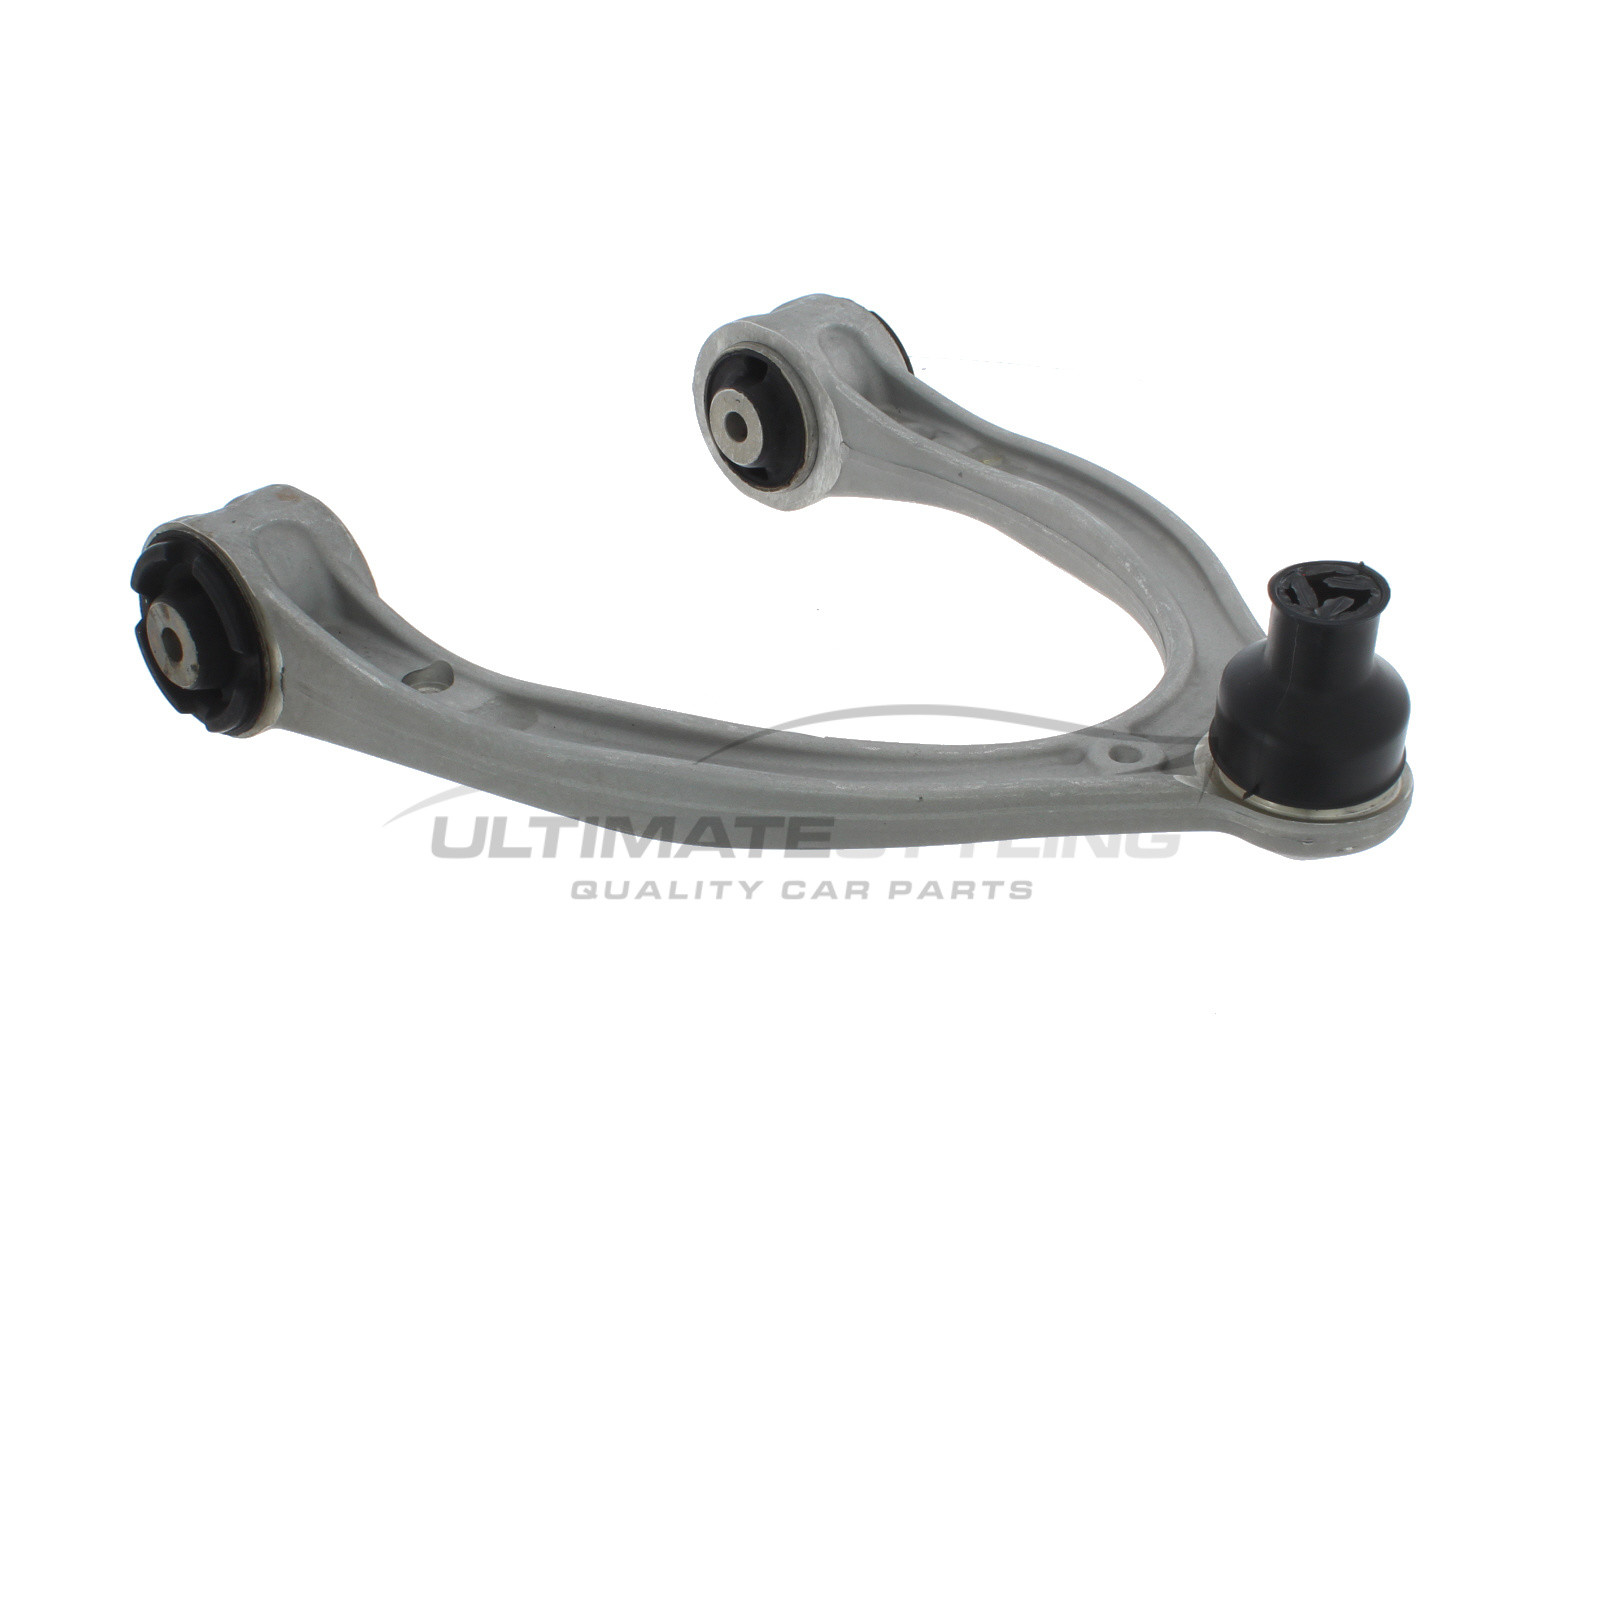 Mercedes Benz C Class 2014-3000, Mercedes Benz E Class 2016-3000, Mercedes Benz EQC 2019-3000, Mercedes Benz GLC Class 2015-3000 Front Lower Suspension Arm (Alloy) Including Ball Joint and Rear Bush Driver Side (RH)